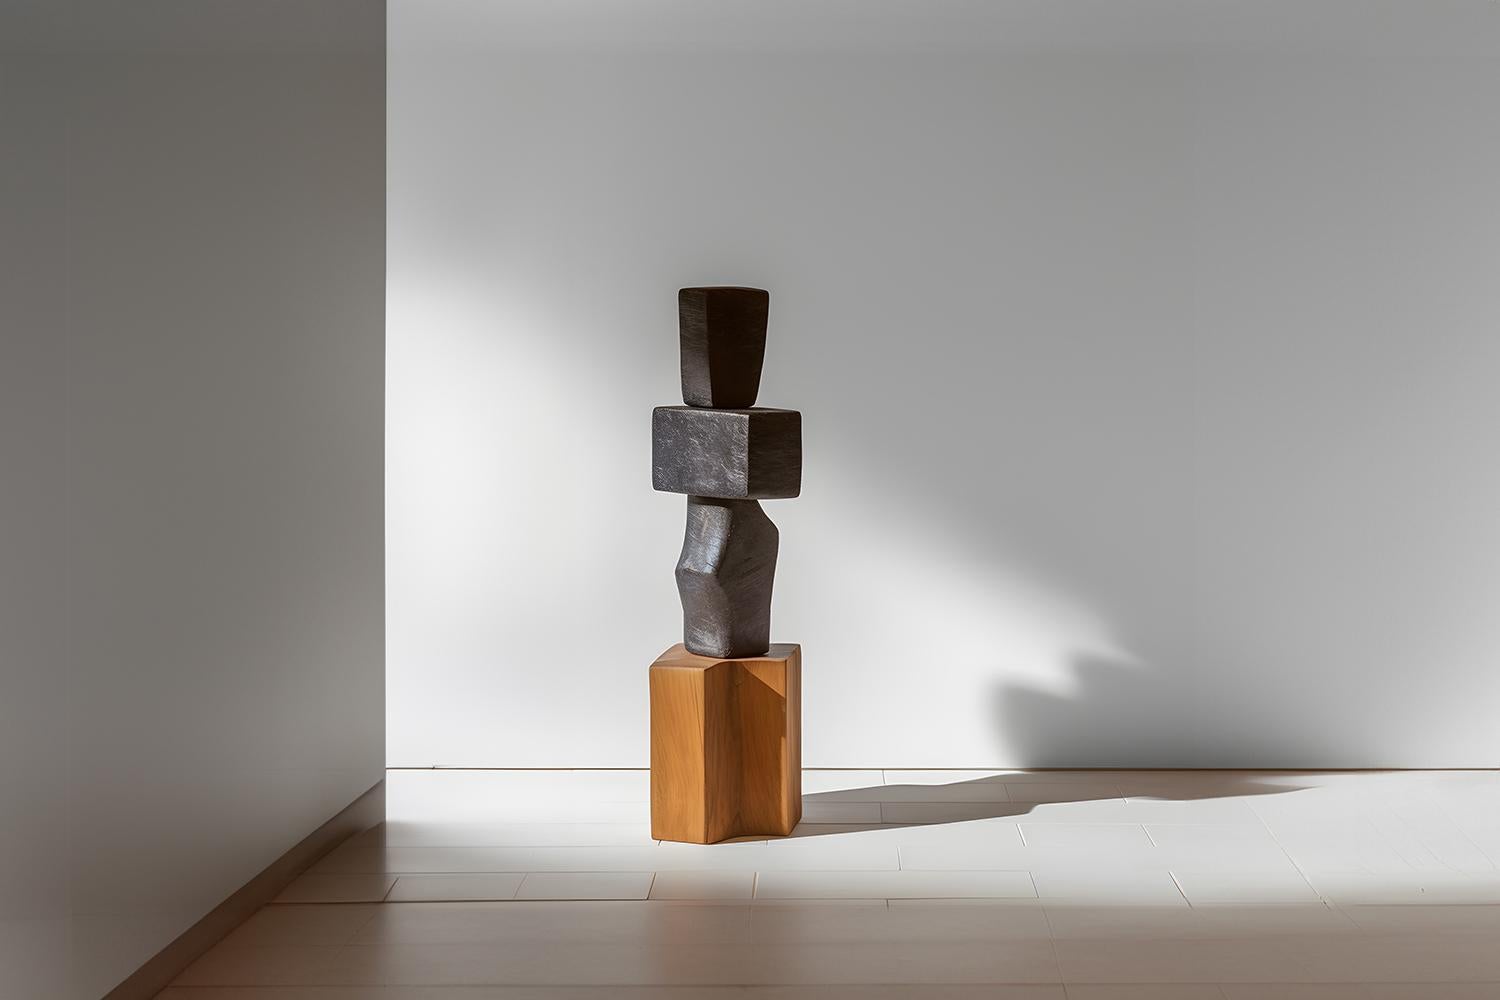 Abstract Modernist Free Form Wooden Sculpture in the style of Jean Arp, Unseen Force 13 by Joel Escalona



This monolithic sculpture, designed by the talented Artist Joel Escalona, is a towering example of beauty in craftsmanship. Hand and digital